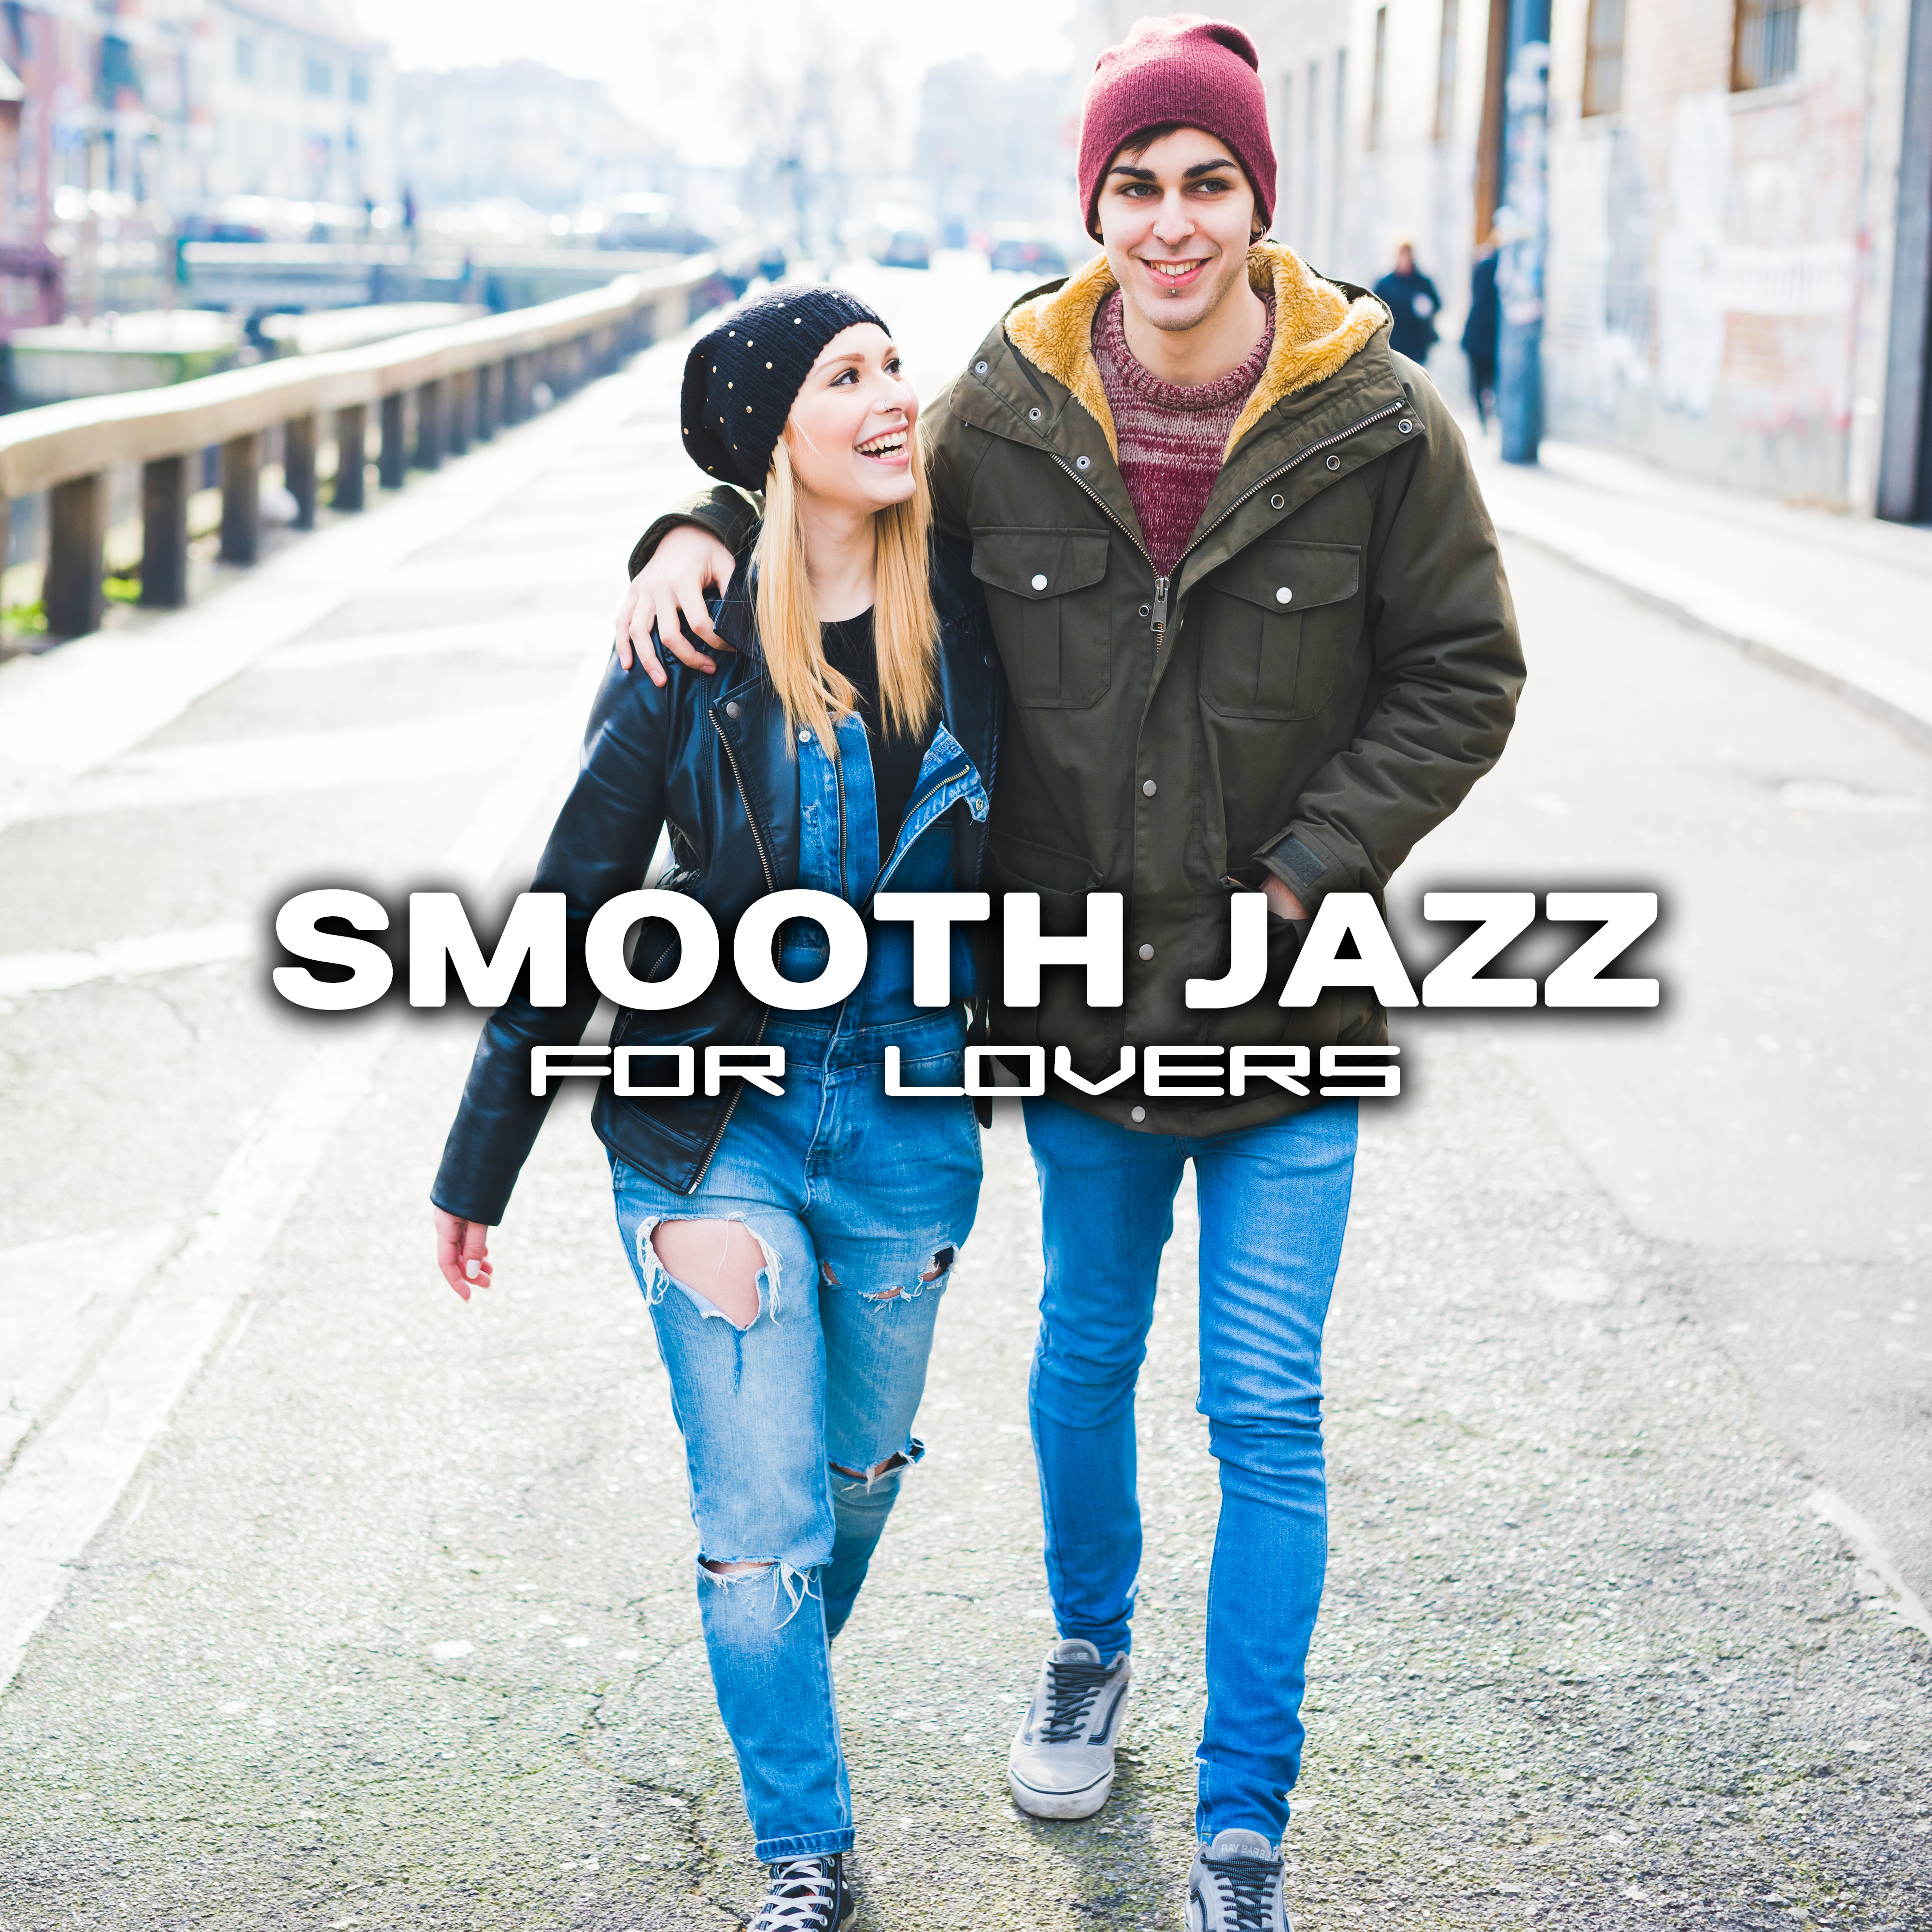 Smooth Jazz for Lovers  Easy Listening Piano Jazz, Calm Down  Rest, Romantic Jazz Sounds